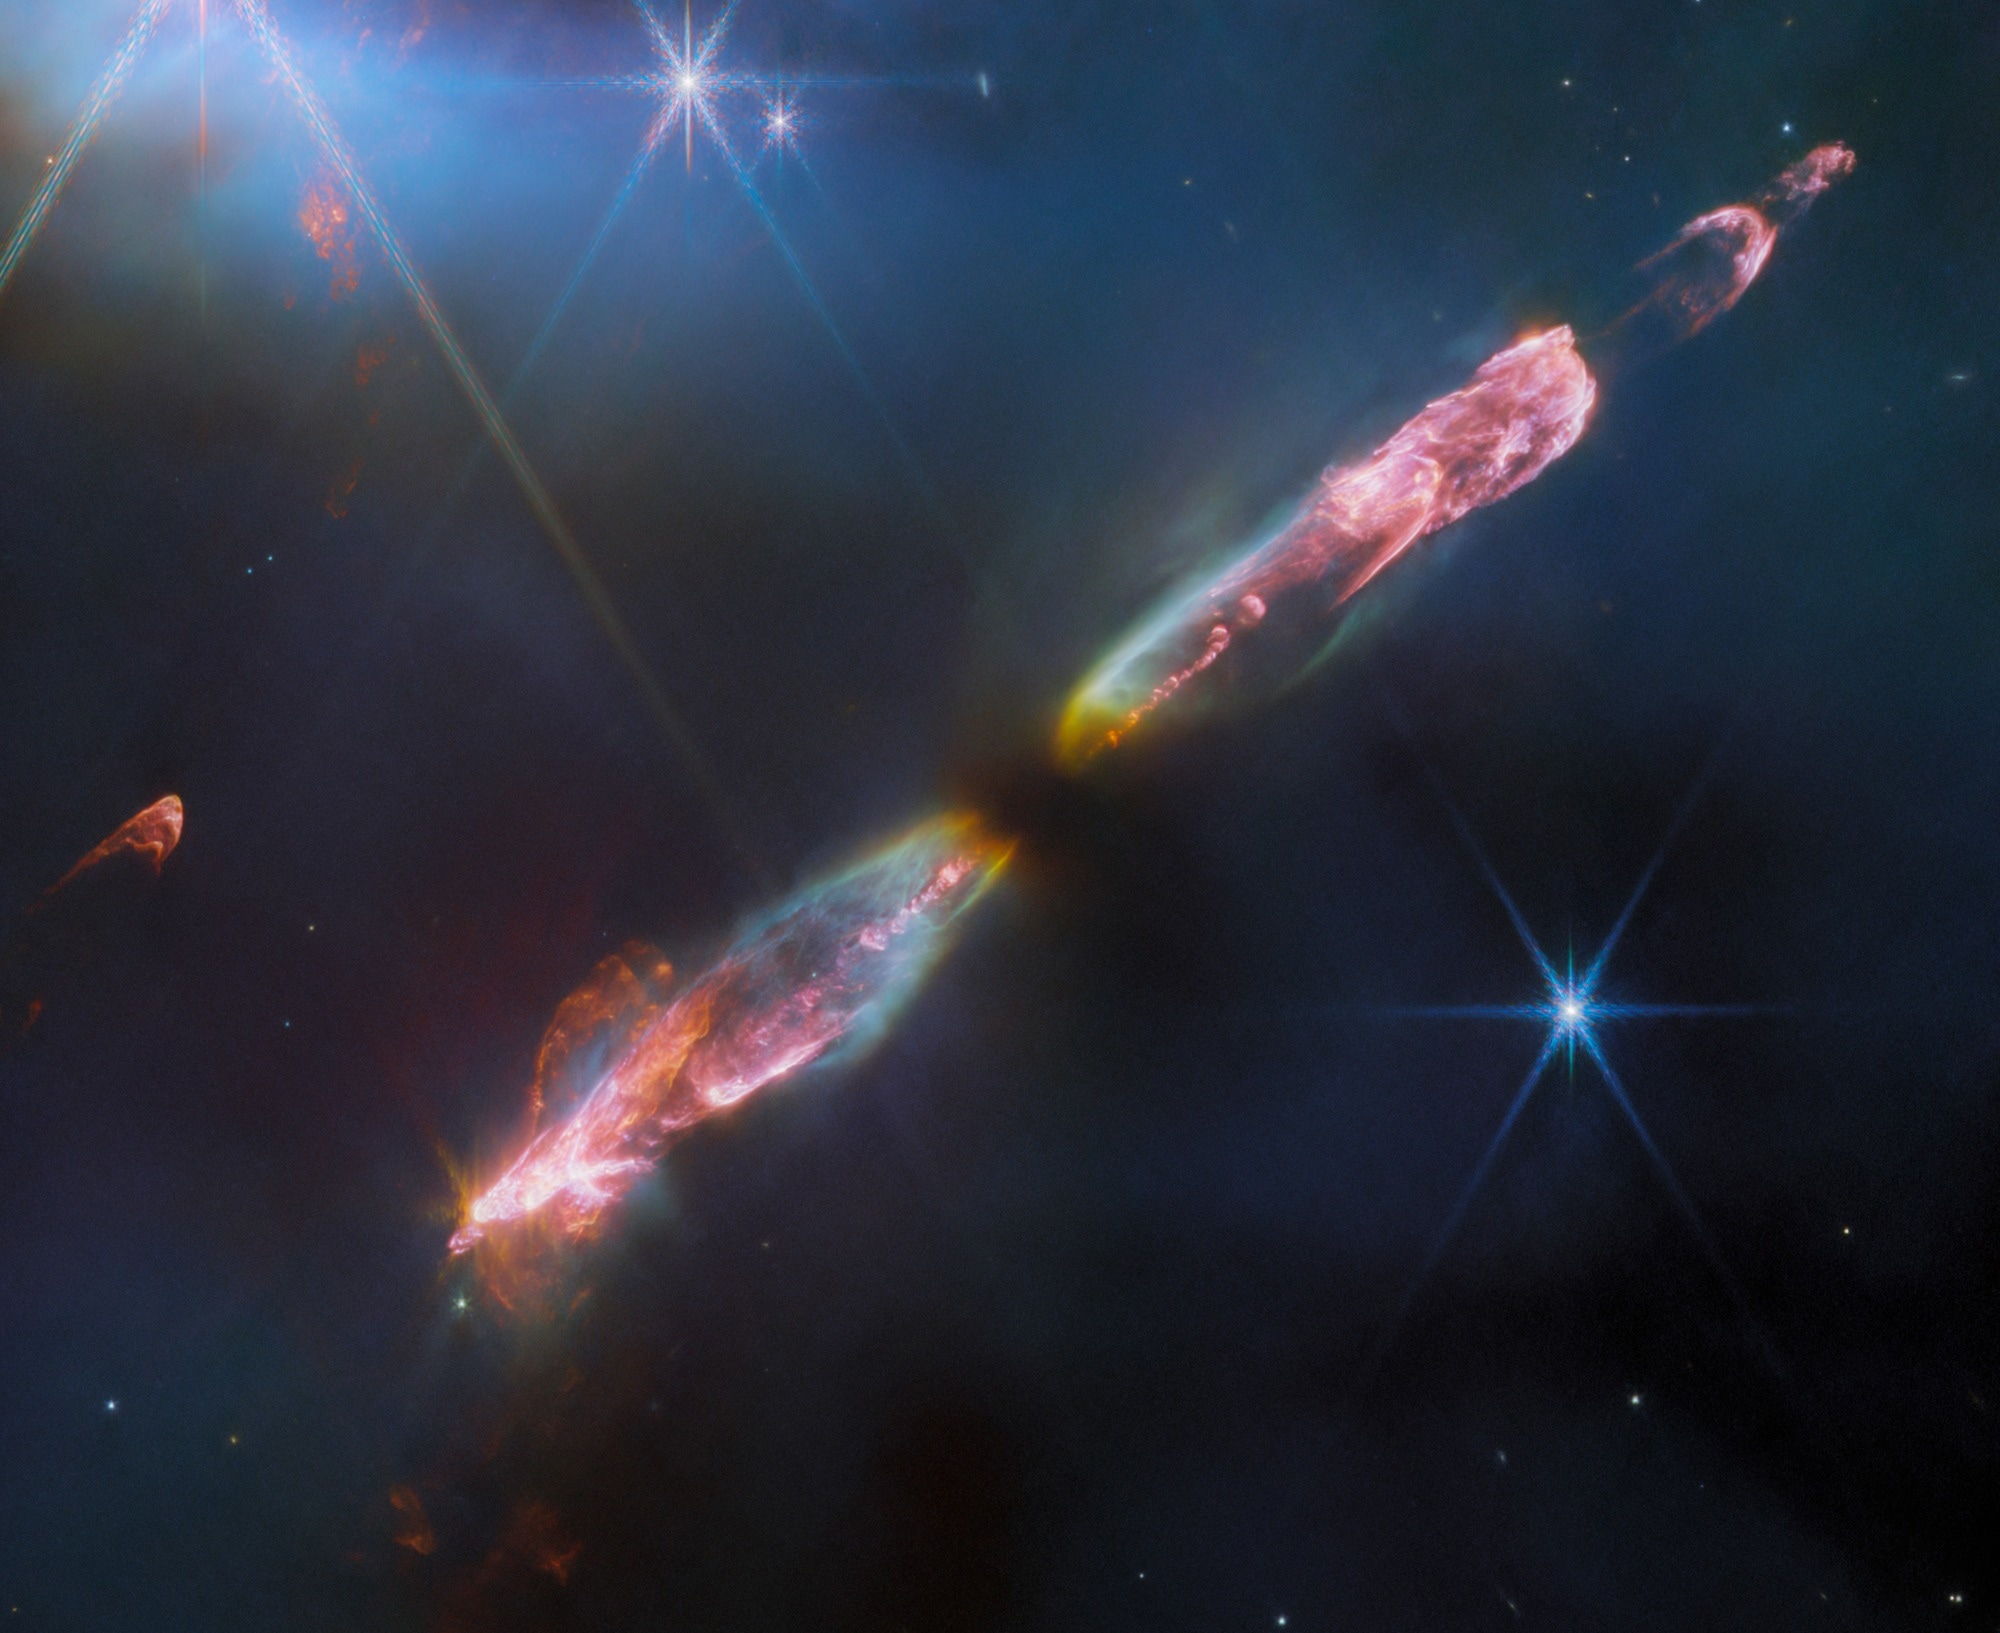 James Webb Space Telescope Captures Young Star’s Supersonic Outflow